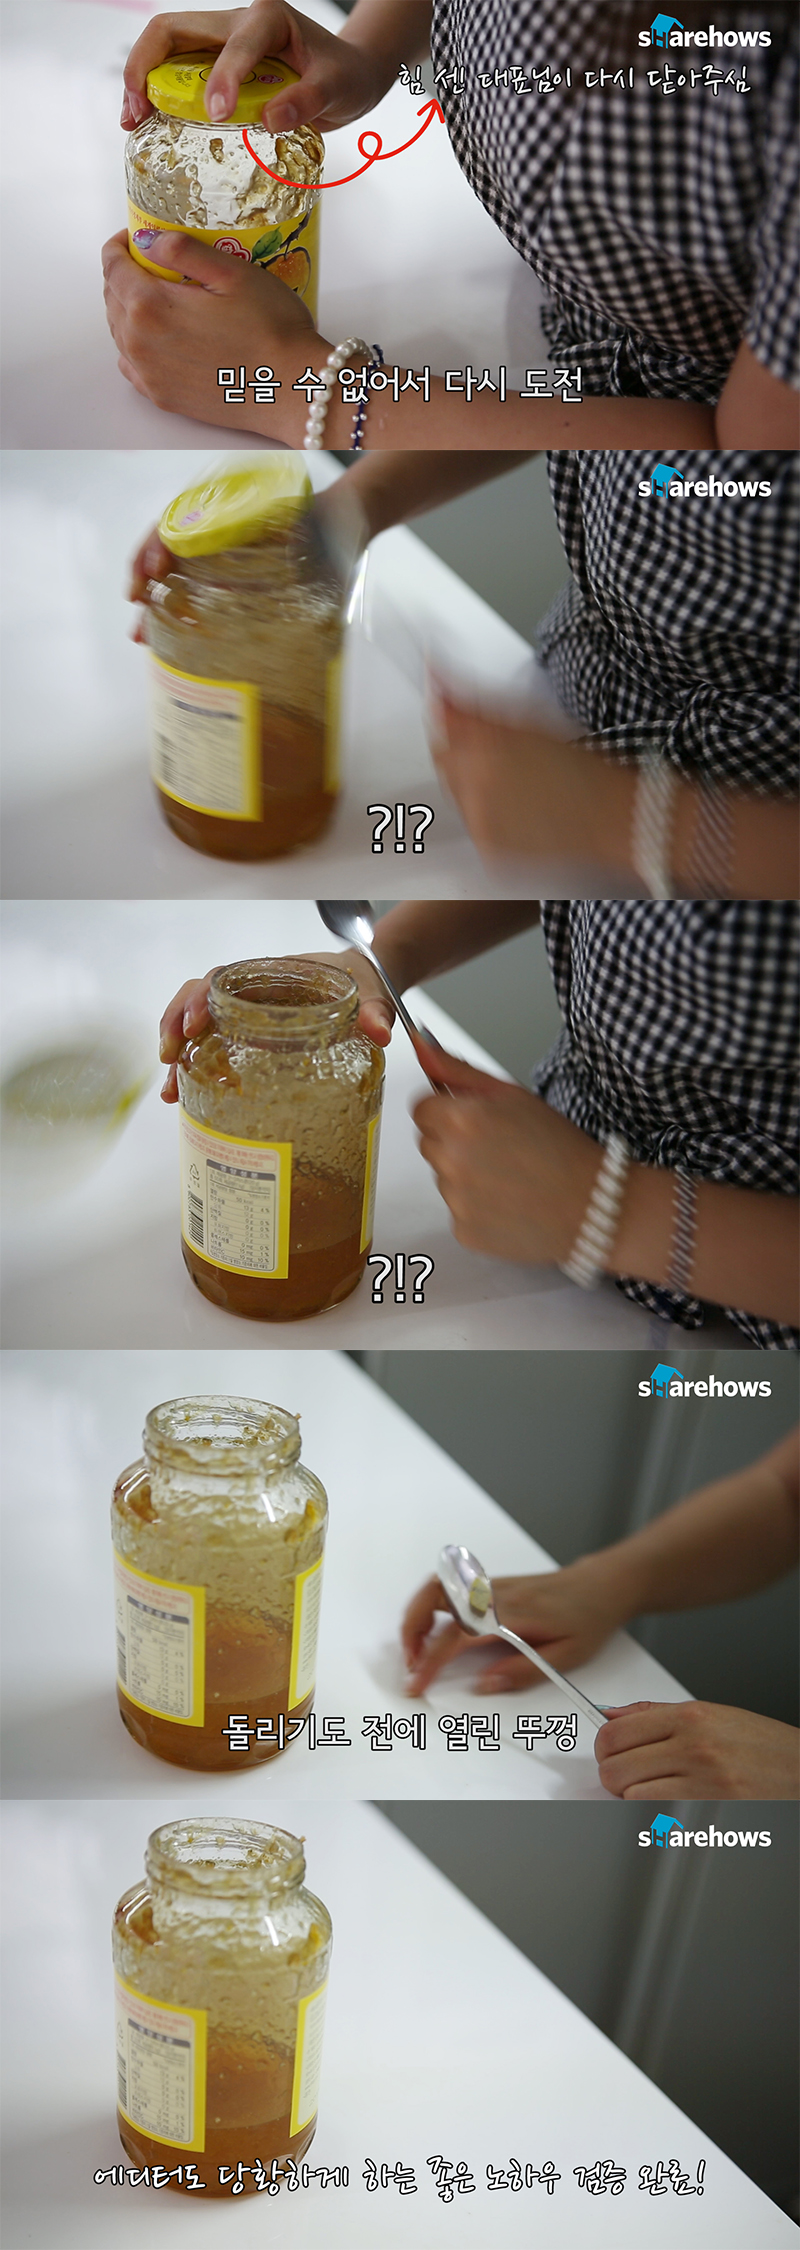 how-to-open-a-jar 04